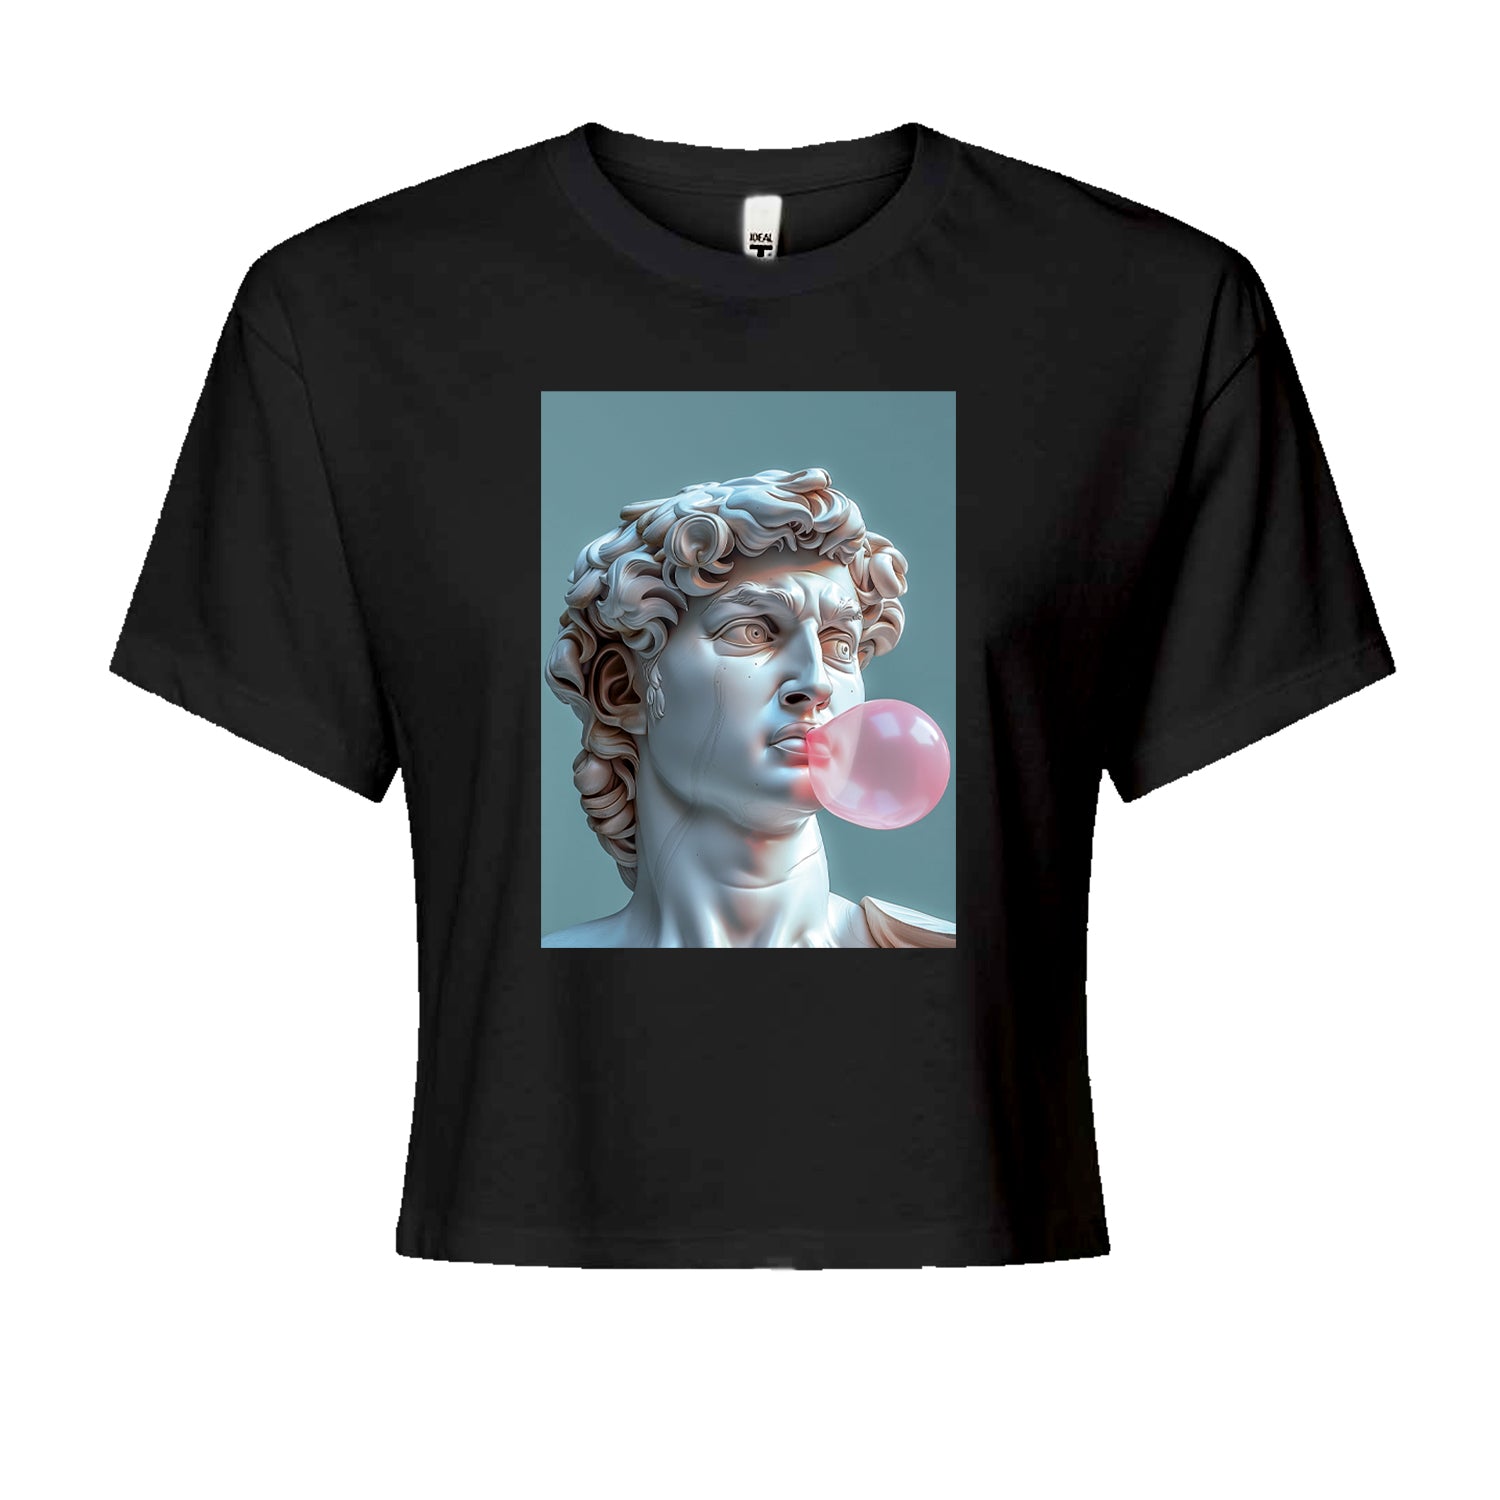 Michelangelo's David with Bubble Gum Contemporary Statue Art Cropped T-Shirt